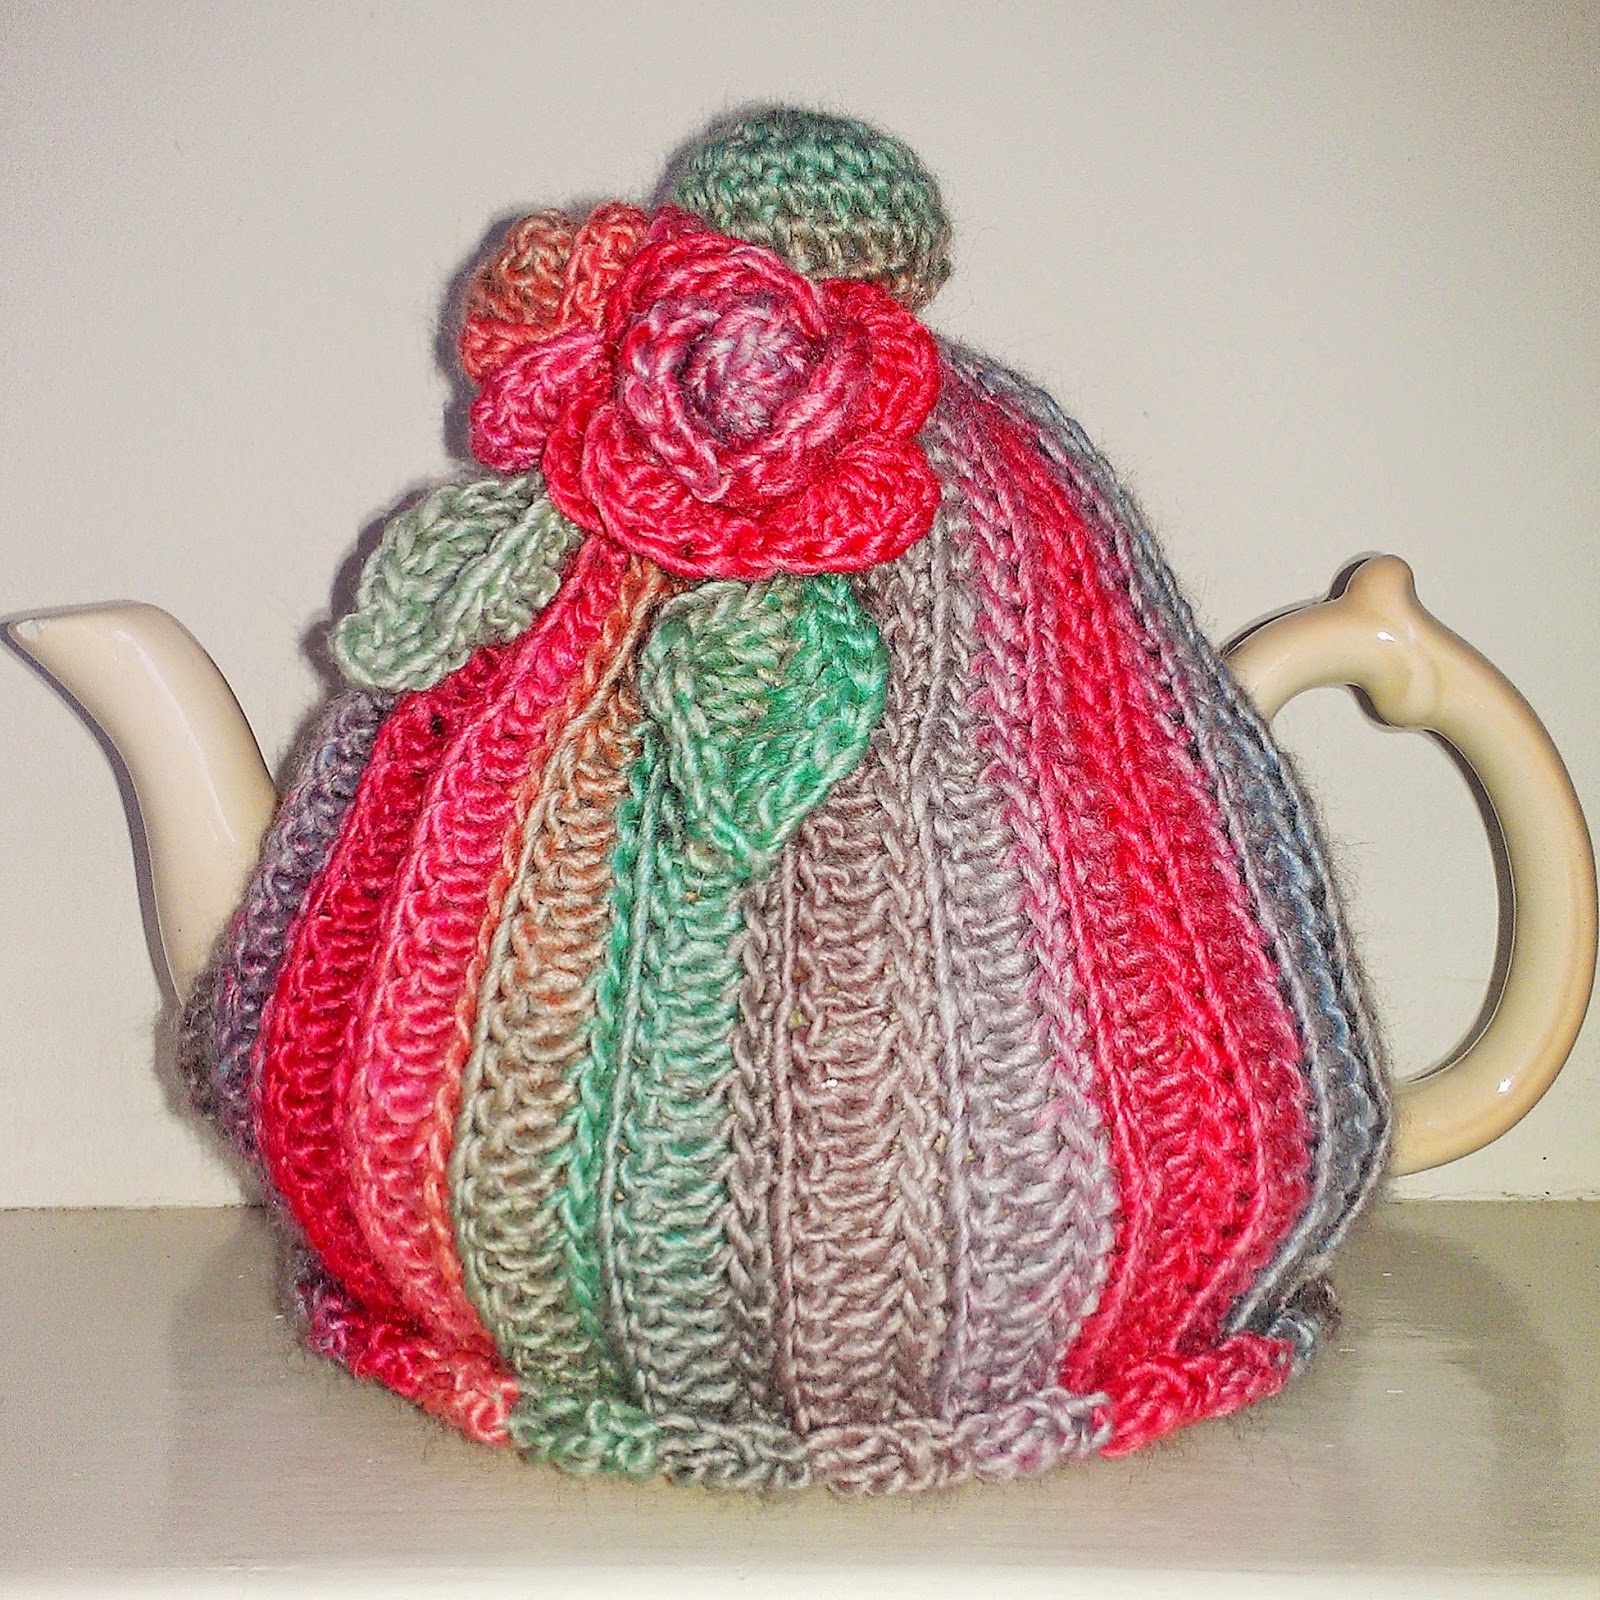 craft-a-cure-for-cancer-free-tea-cosy-patterns-crochet-tea-cosies